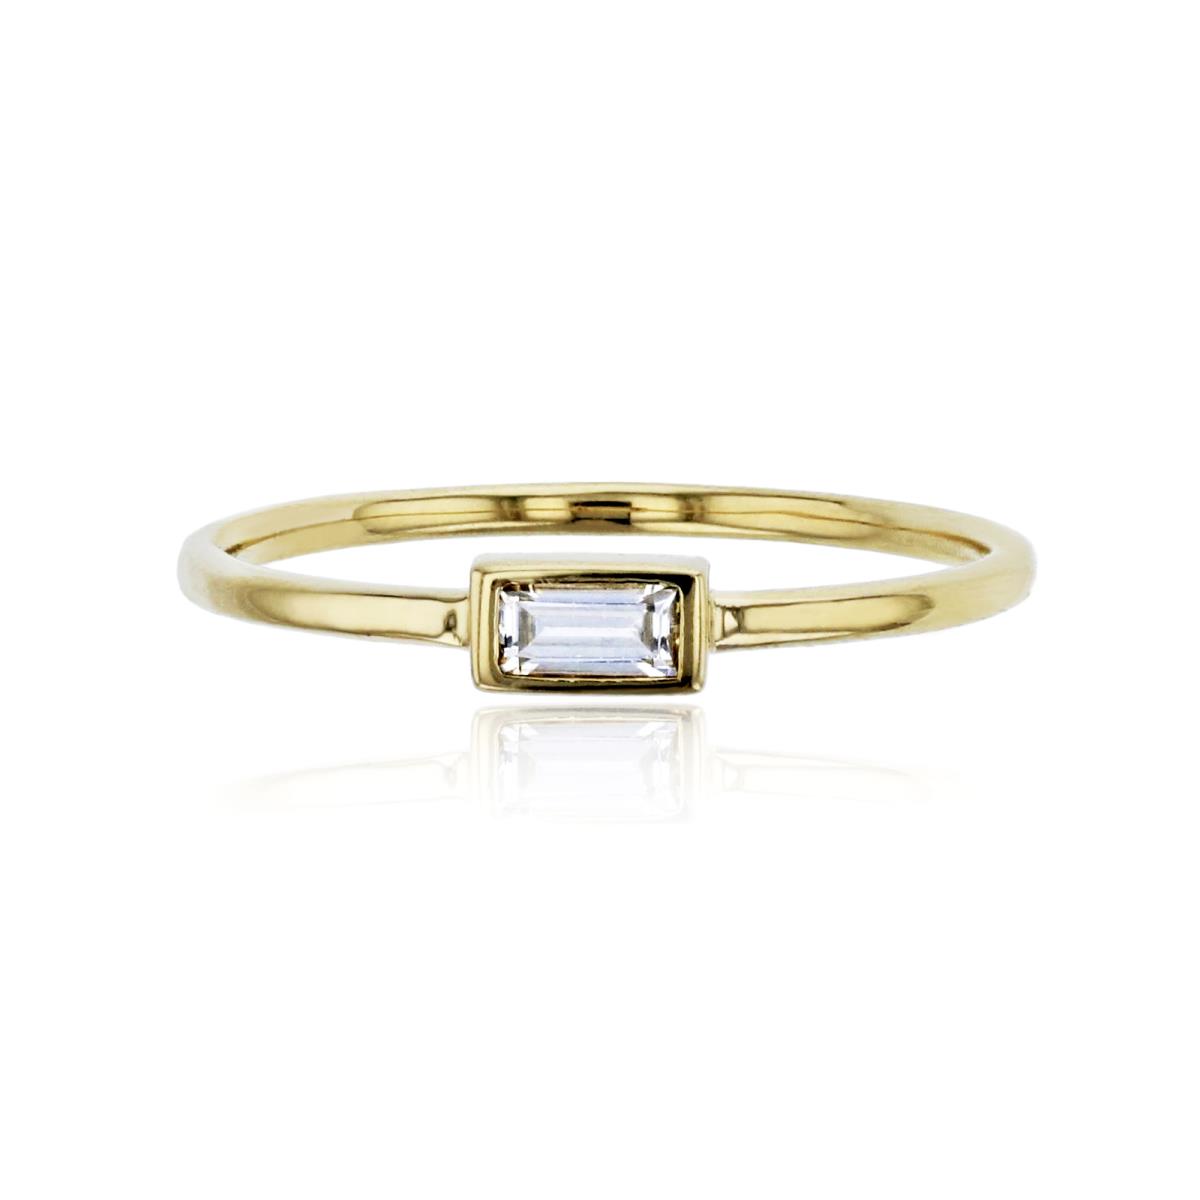 14K Yellow Gold Polished Baguette Bezel Solitaire Ring